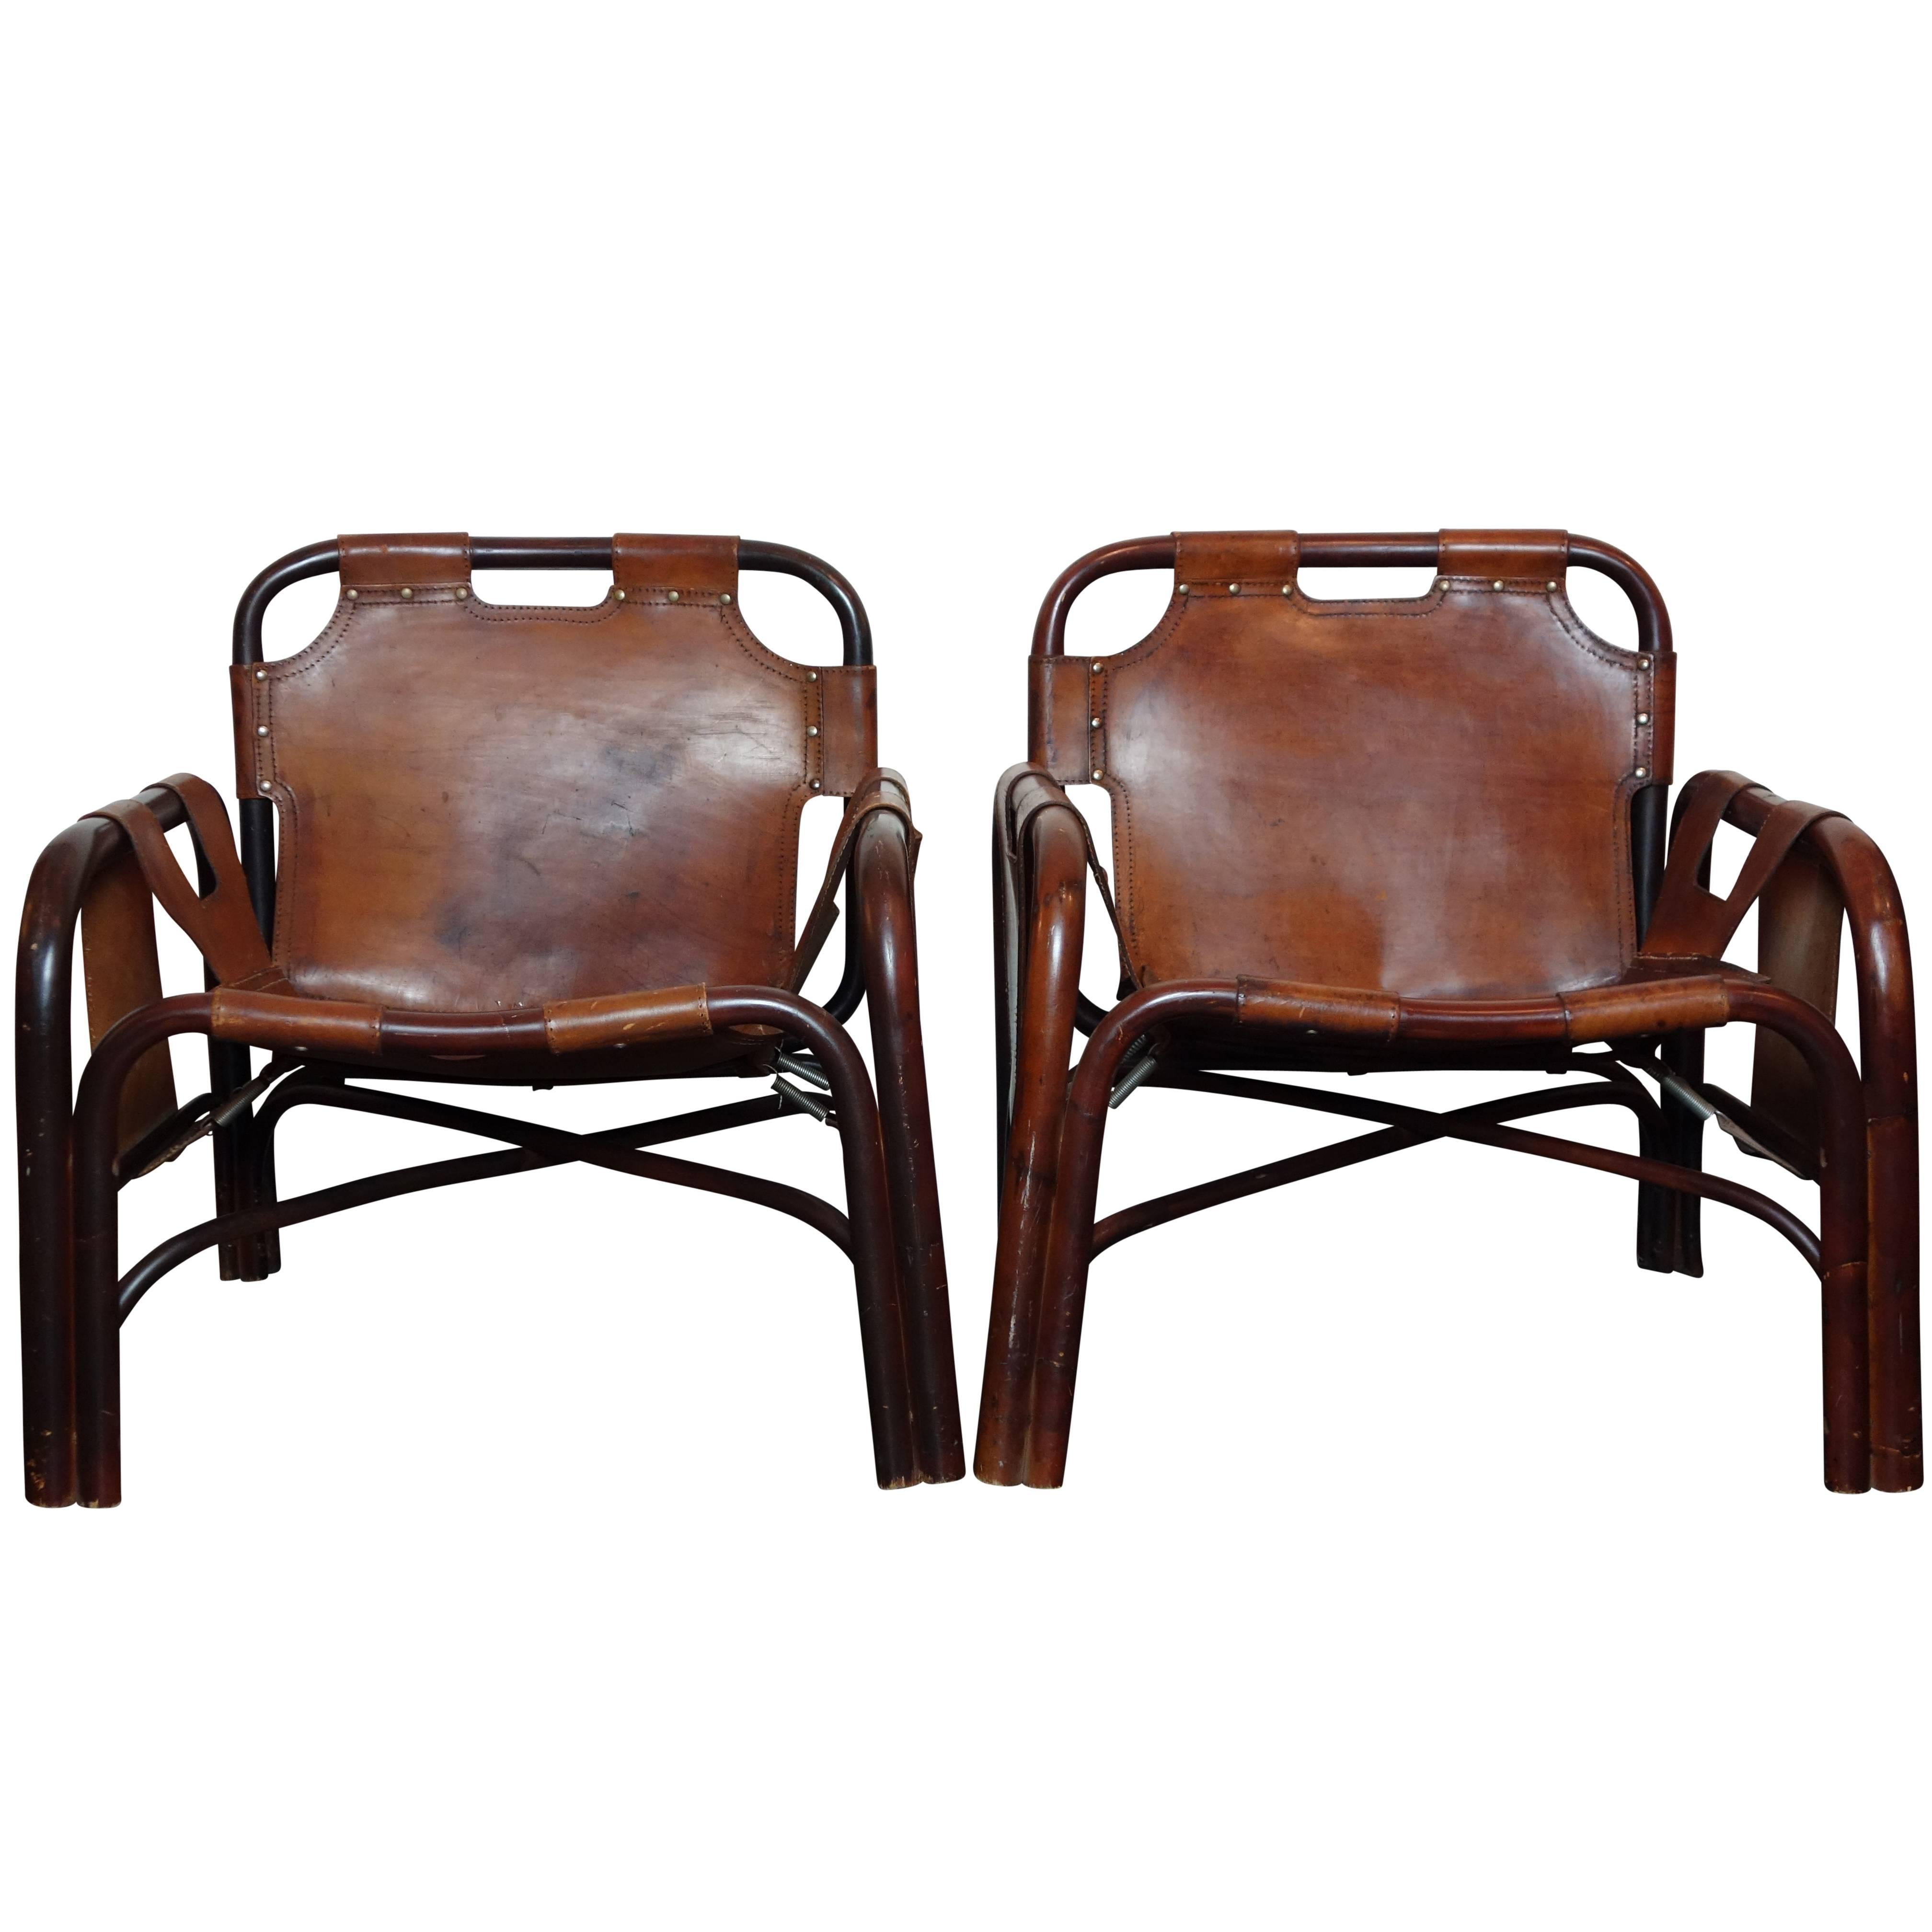 Pair of Italian Leather Safari Chairs in the Style of Arne Norell